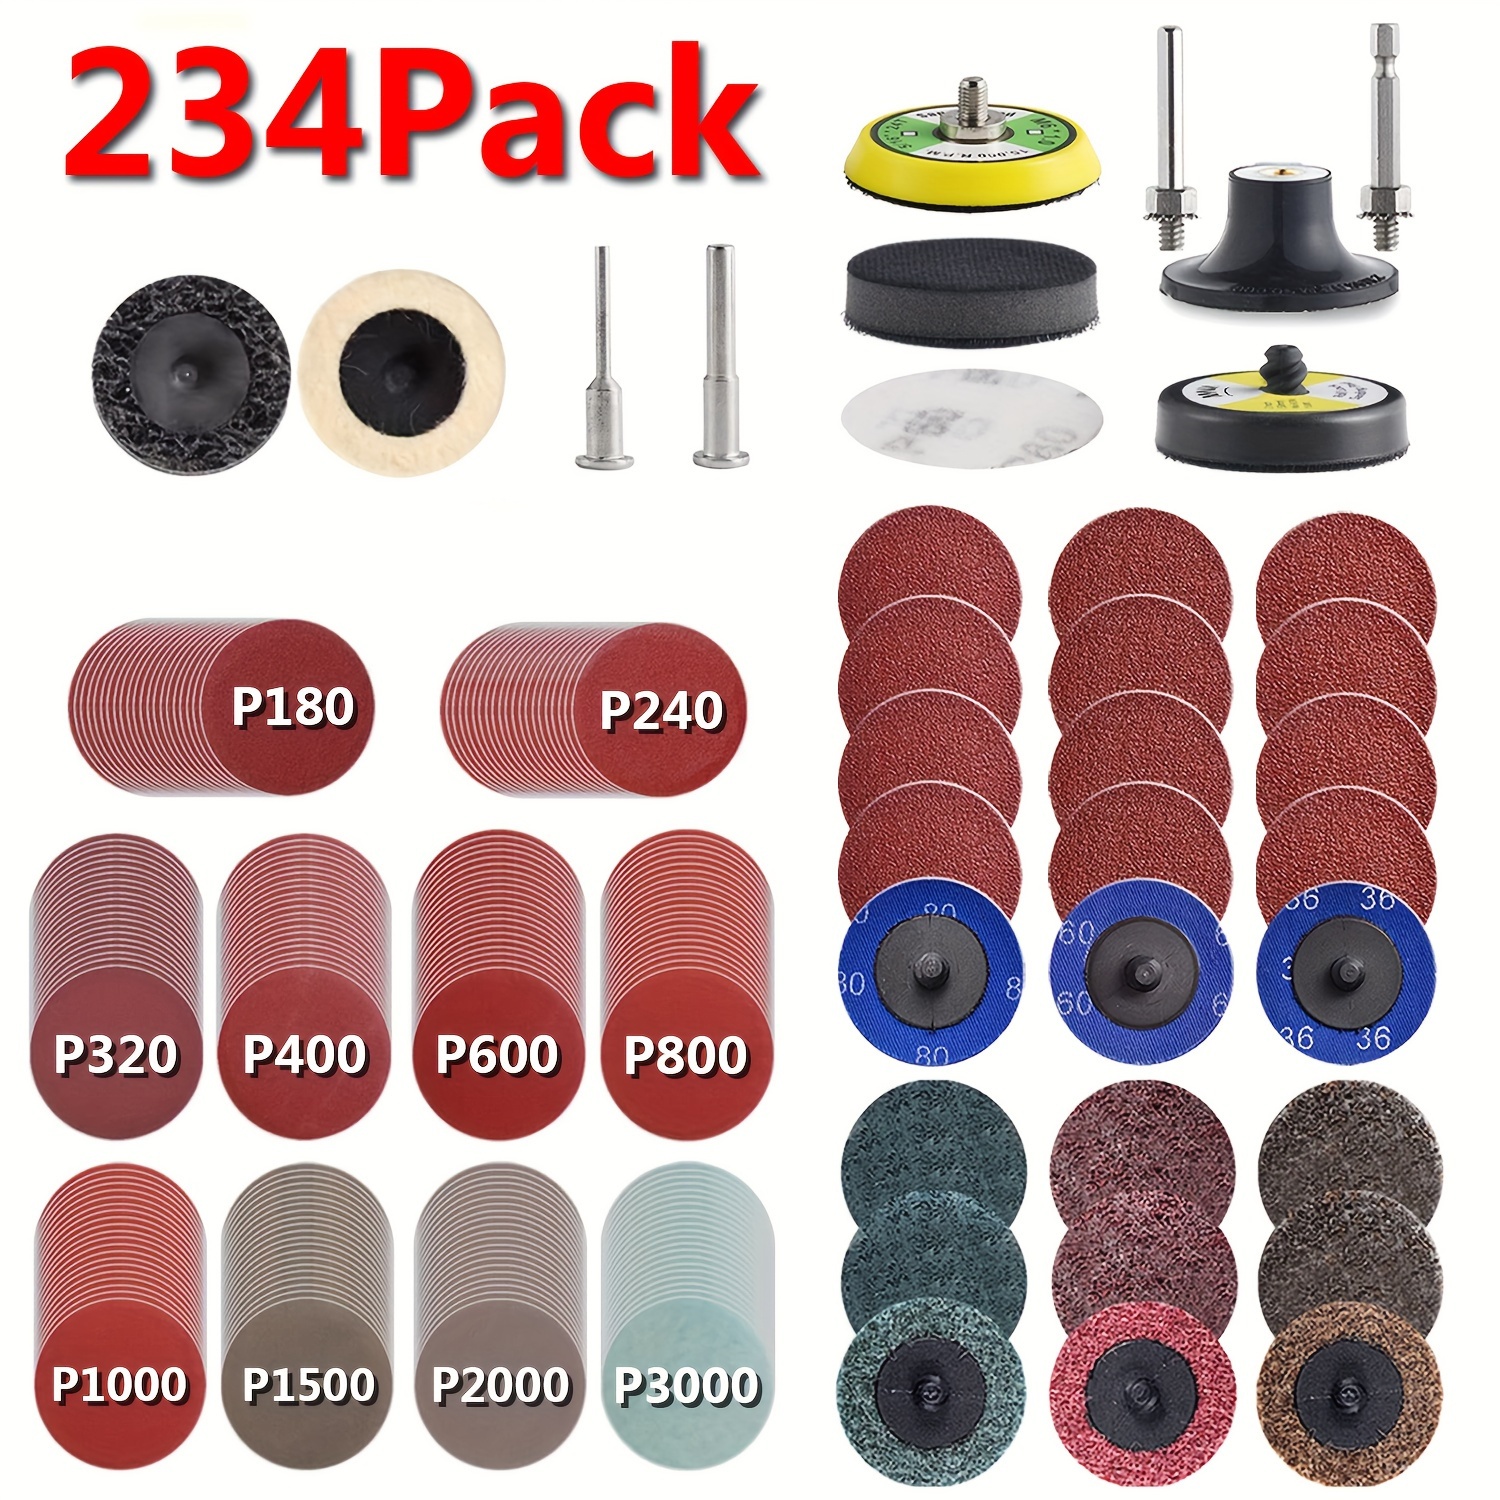 

234pcs Sanding Disc Pad Variety Kit, 2", For Mold Grinders, Drill Sanding Attachments And Rotary Tools, With 1/8" And 1/4" Shanks, Grit Range P36-3000